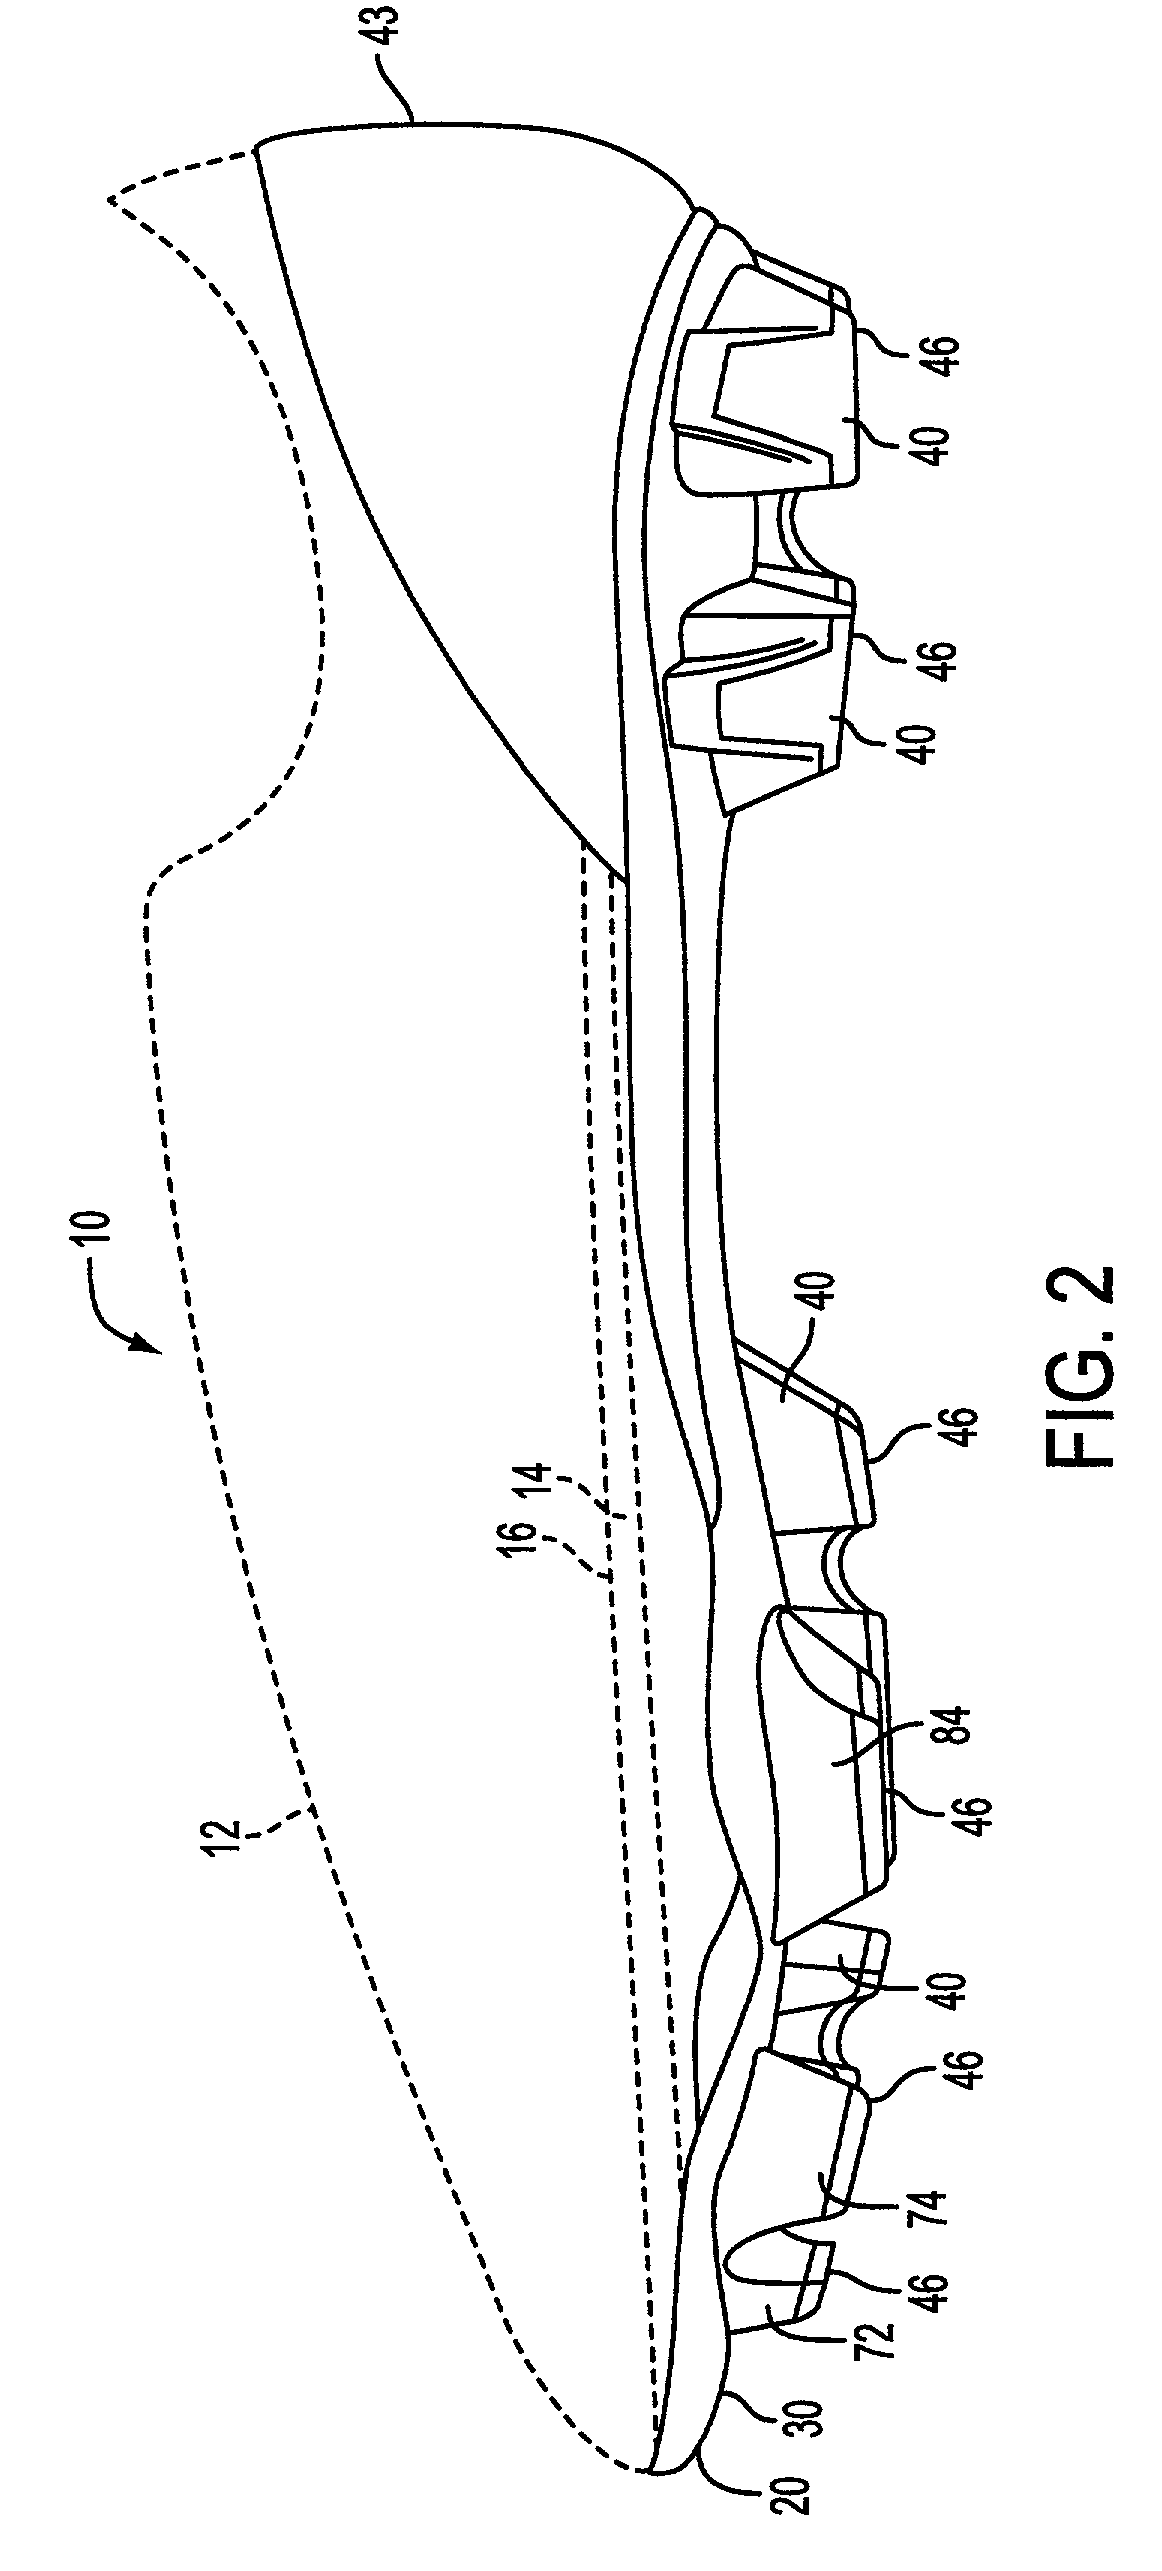 Article of footwear having a regional cleat configuration